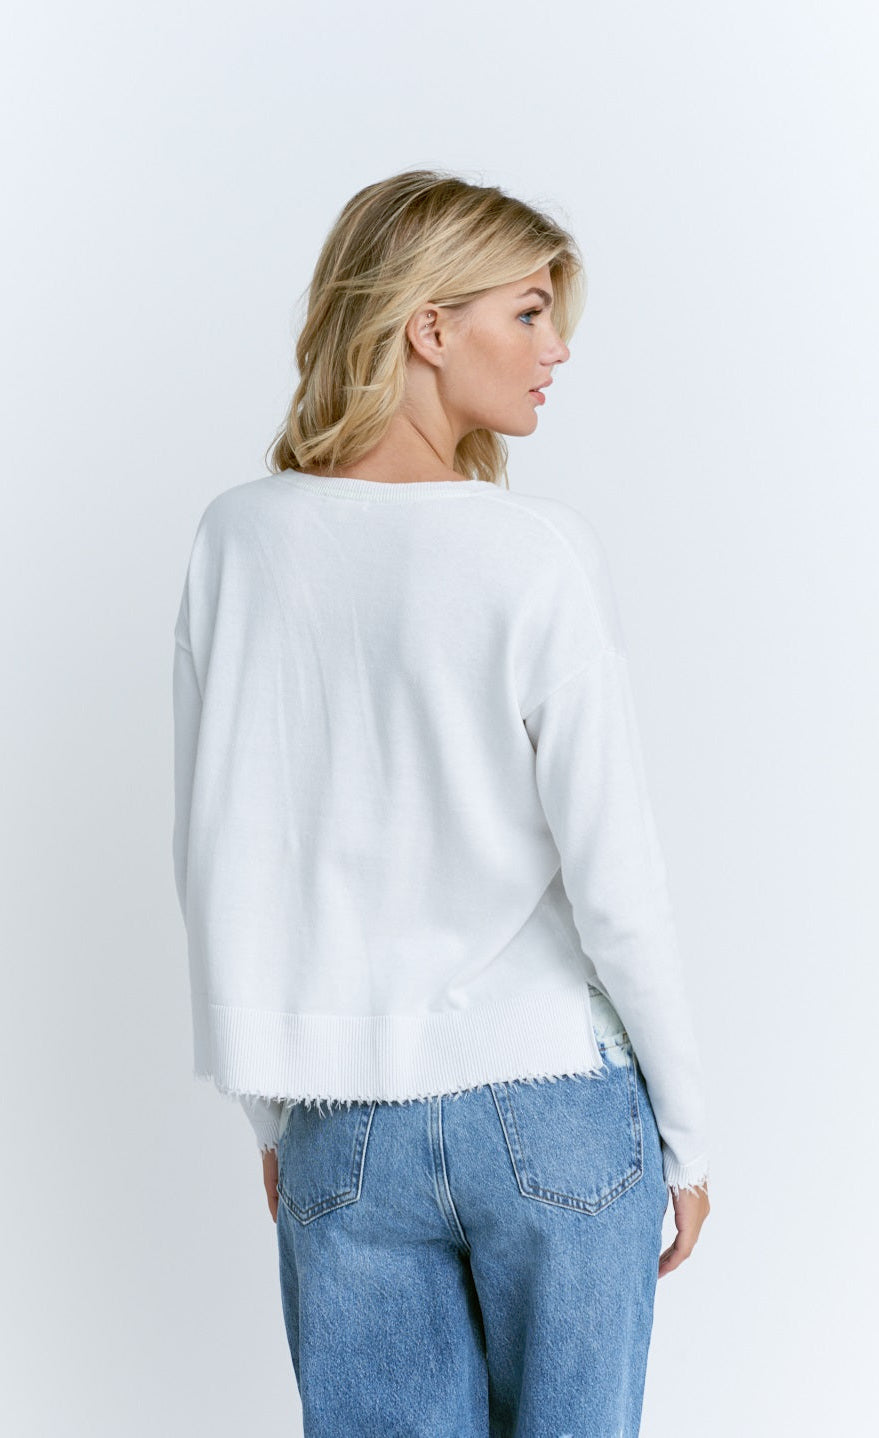 Back top half view of a woman wearing the lisa todd tainted love sweater. This sweater is white with a frayed hem.